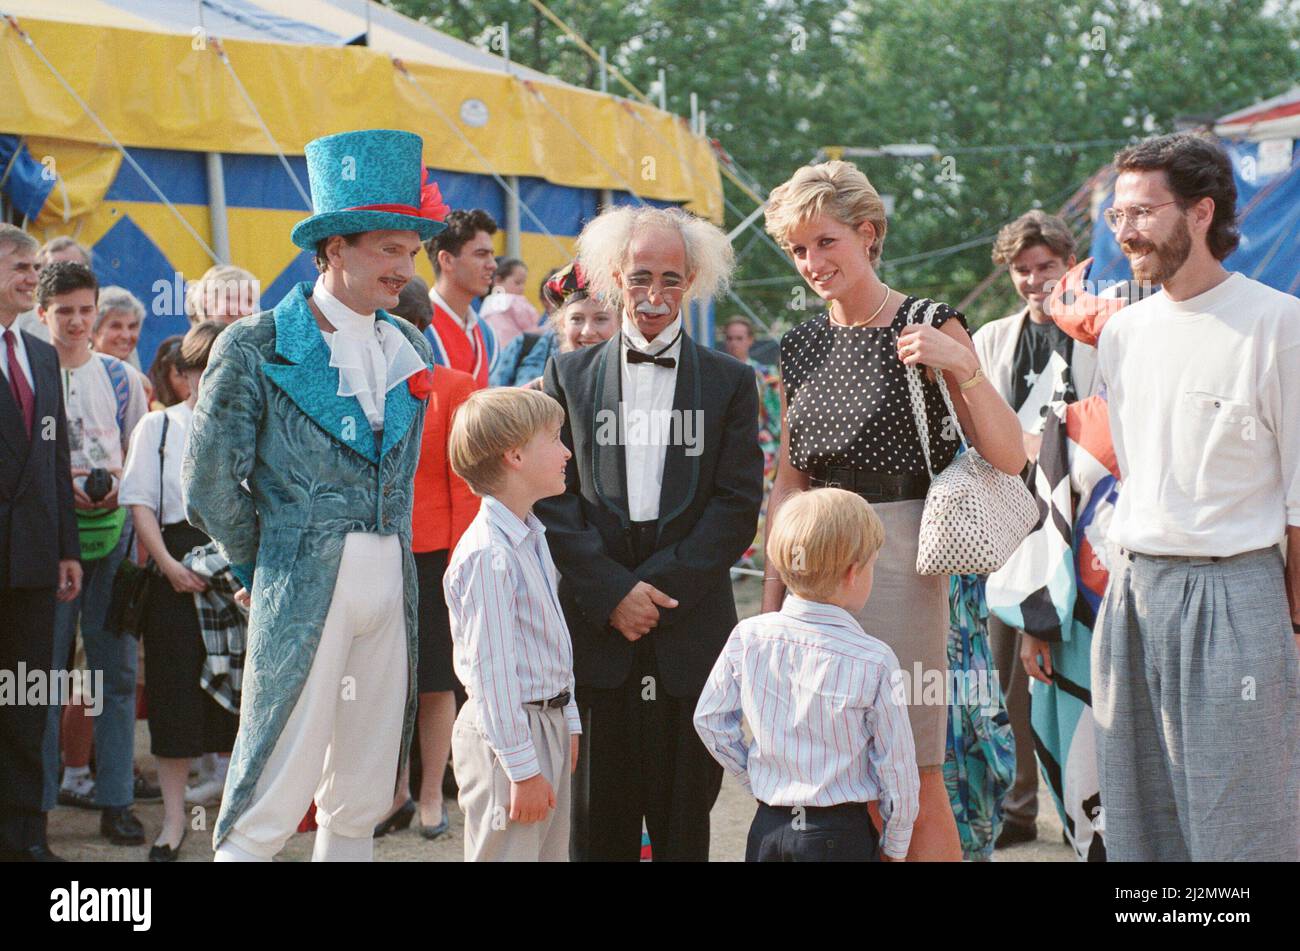 HRH The Princess of Wales, Princess Diana, along with her songs William and Harry enjoy the day atLe Cirque du Soleil, the Children's Circus.  Picture taken 8th August 1990 Stock Photo